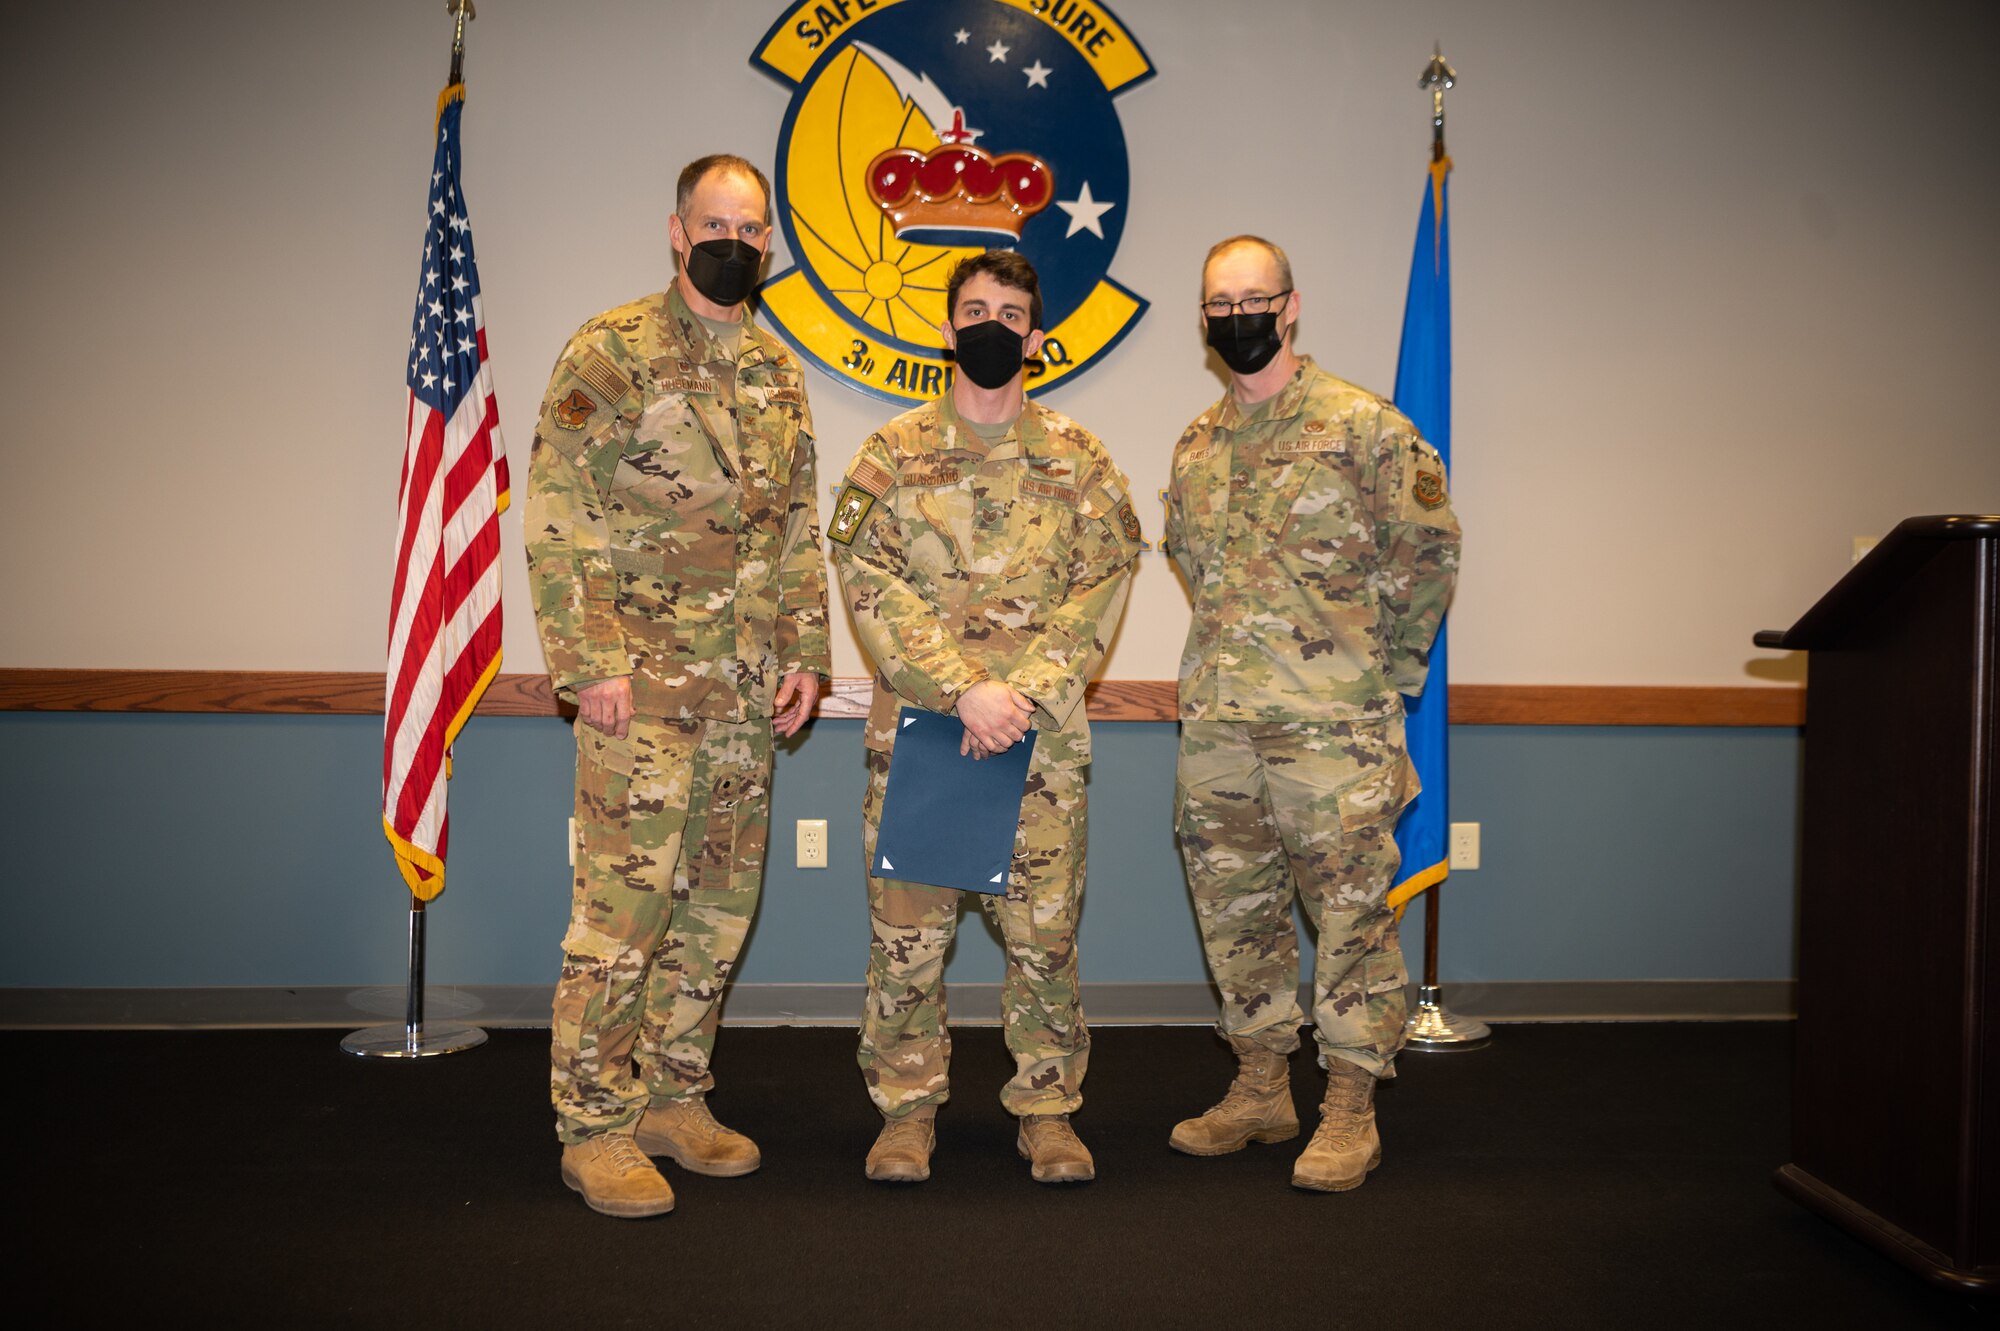 Col. Matt Husemann, left, 436th Airlift Wing commander, and Chief Master Sgt. Timothy Bayes, right, 436th AW command chief, present Tech. Sgt. James Guardiano, 3rd Airlift Squadron noncommissioned officer in charge of scheduling, with a certificate as the week’s Top Performer at Dover Air Force Base, Delaware, Feb. 4, 2022. Guardiano was also coined by Husemann and Bayes for outstanding performance. (U.S. Air Force photo by Mauricio Campino)